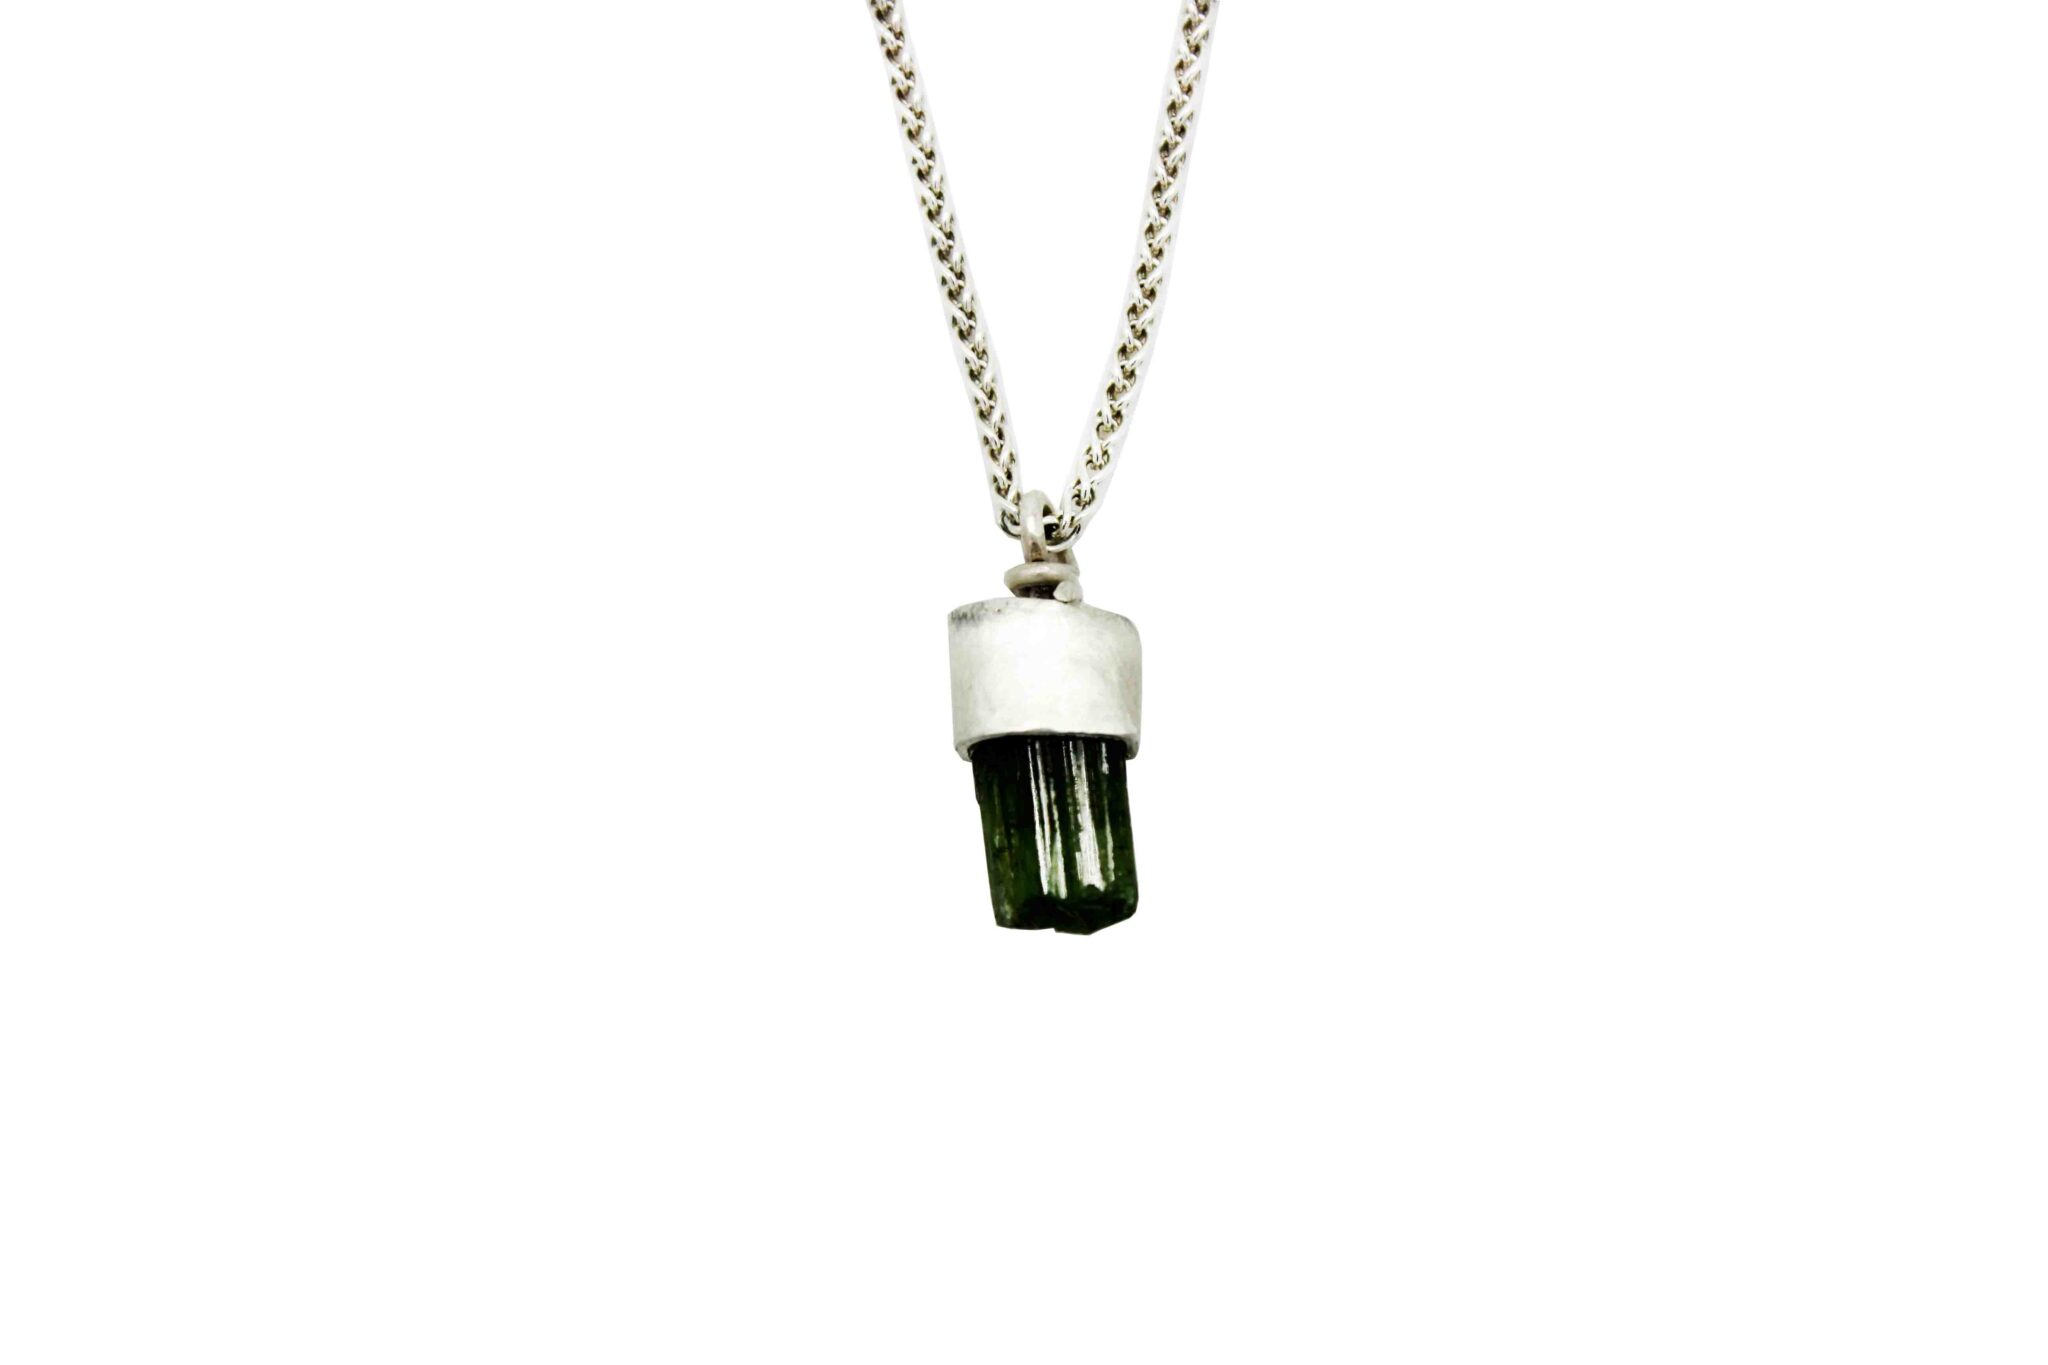 Green tourmaline necklace NT4